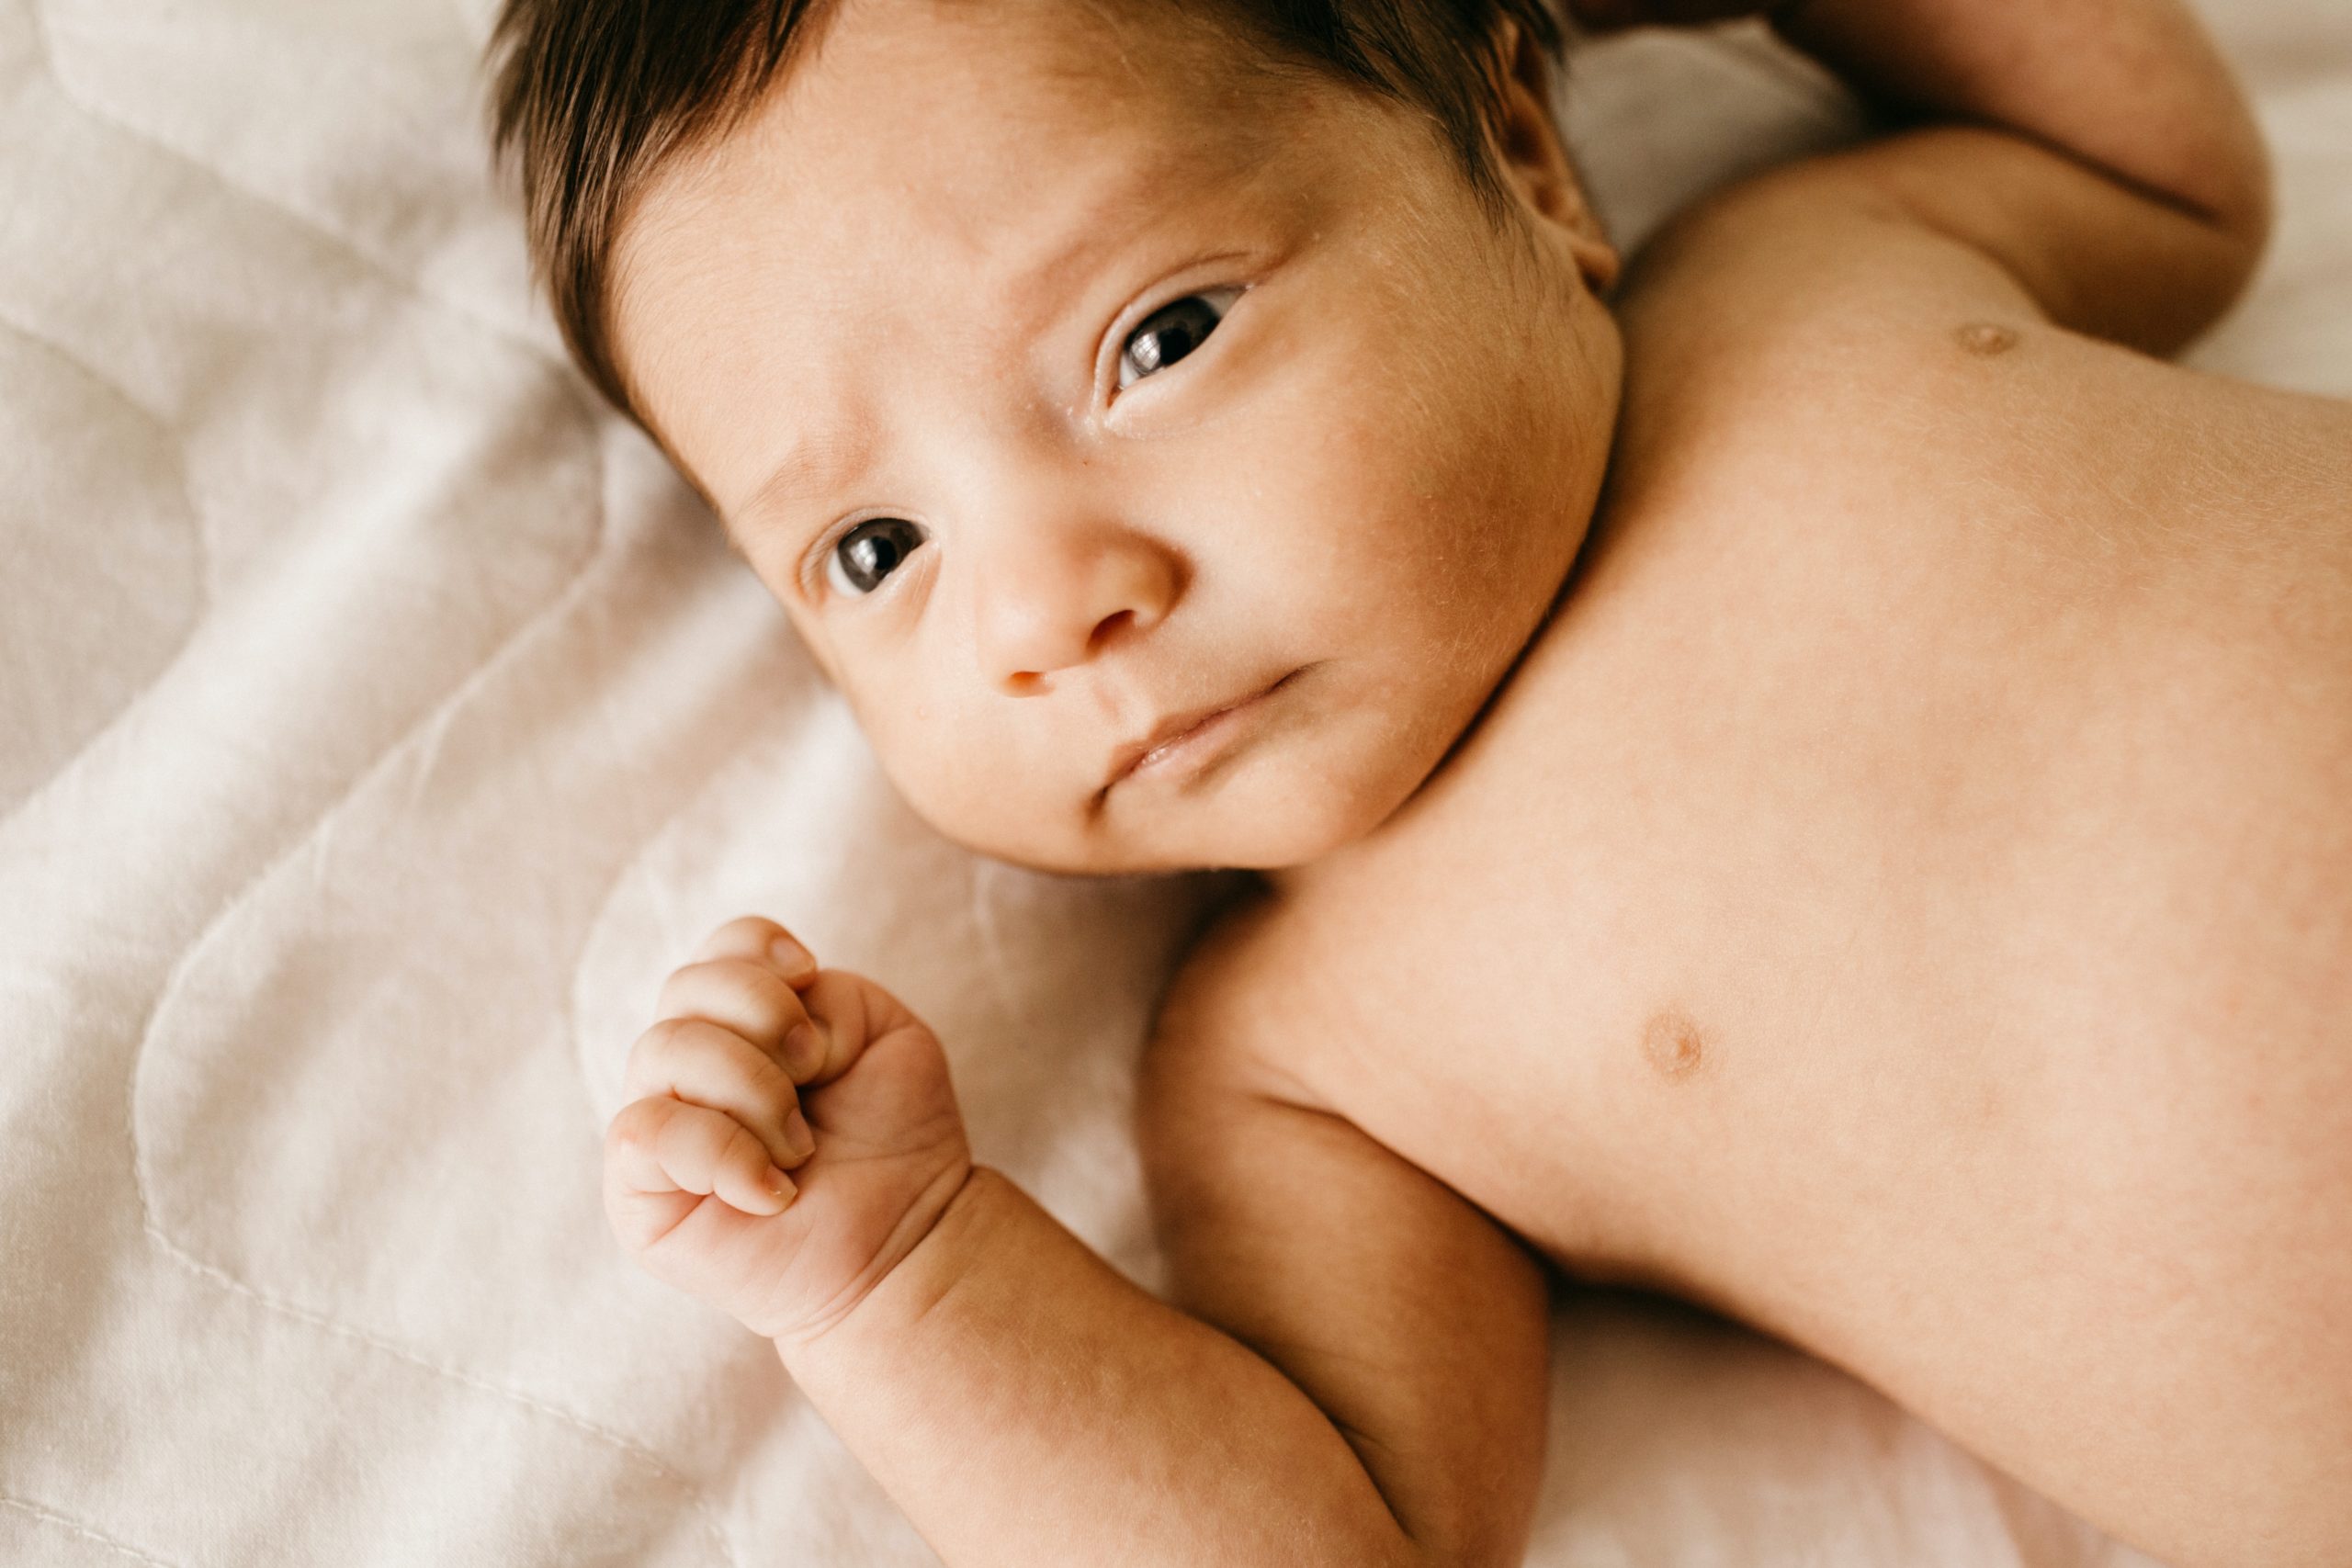 A baby of about three months old lying on a white blanket to demonstrate that infants are eligible for head start.